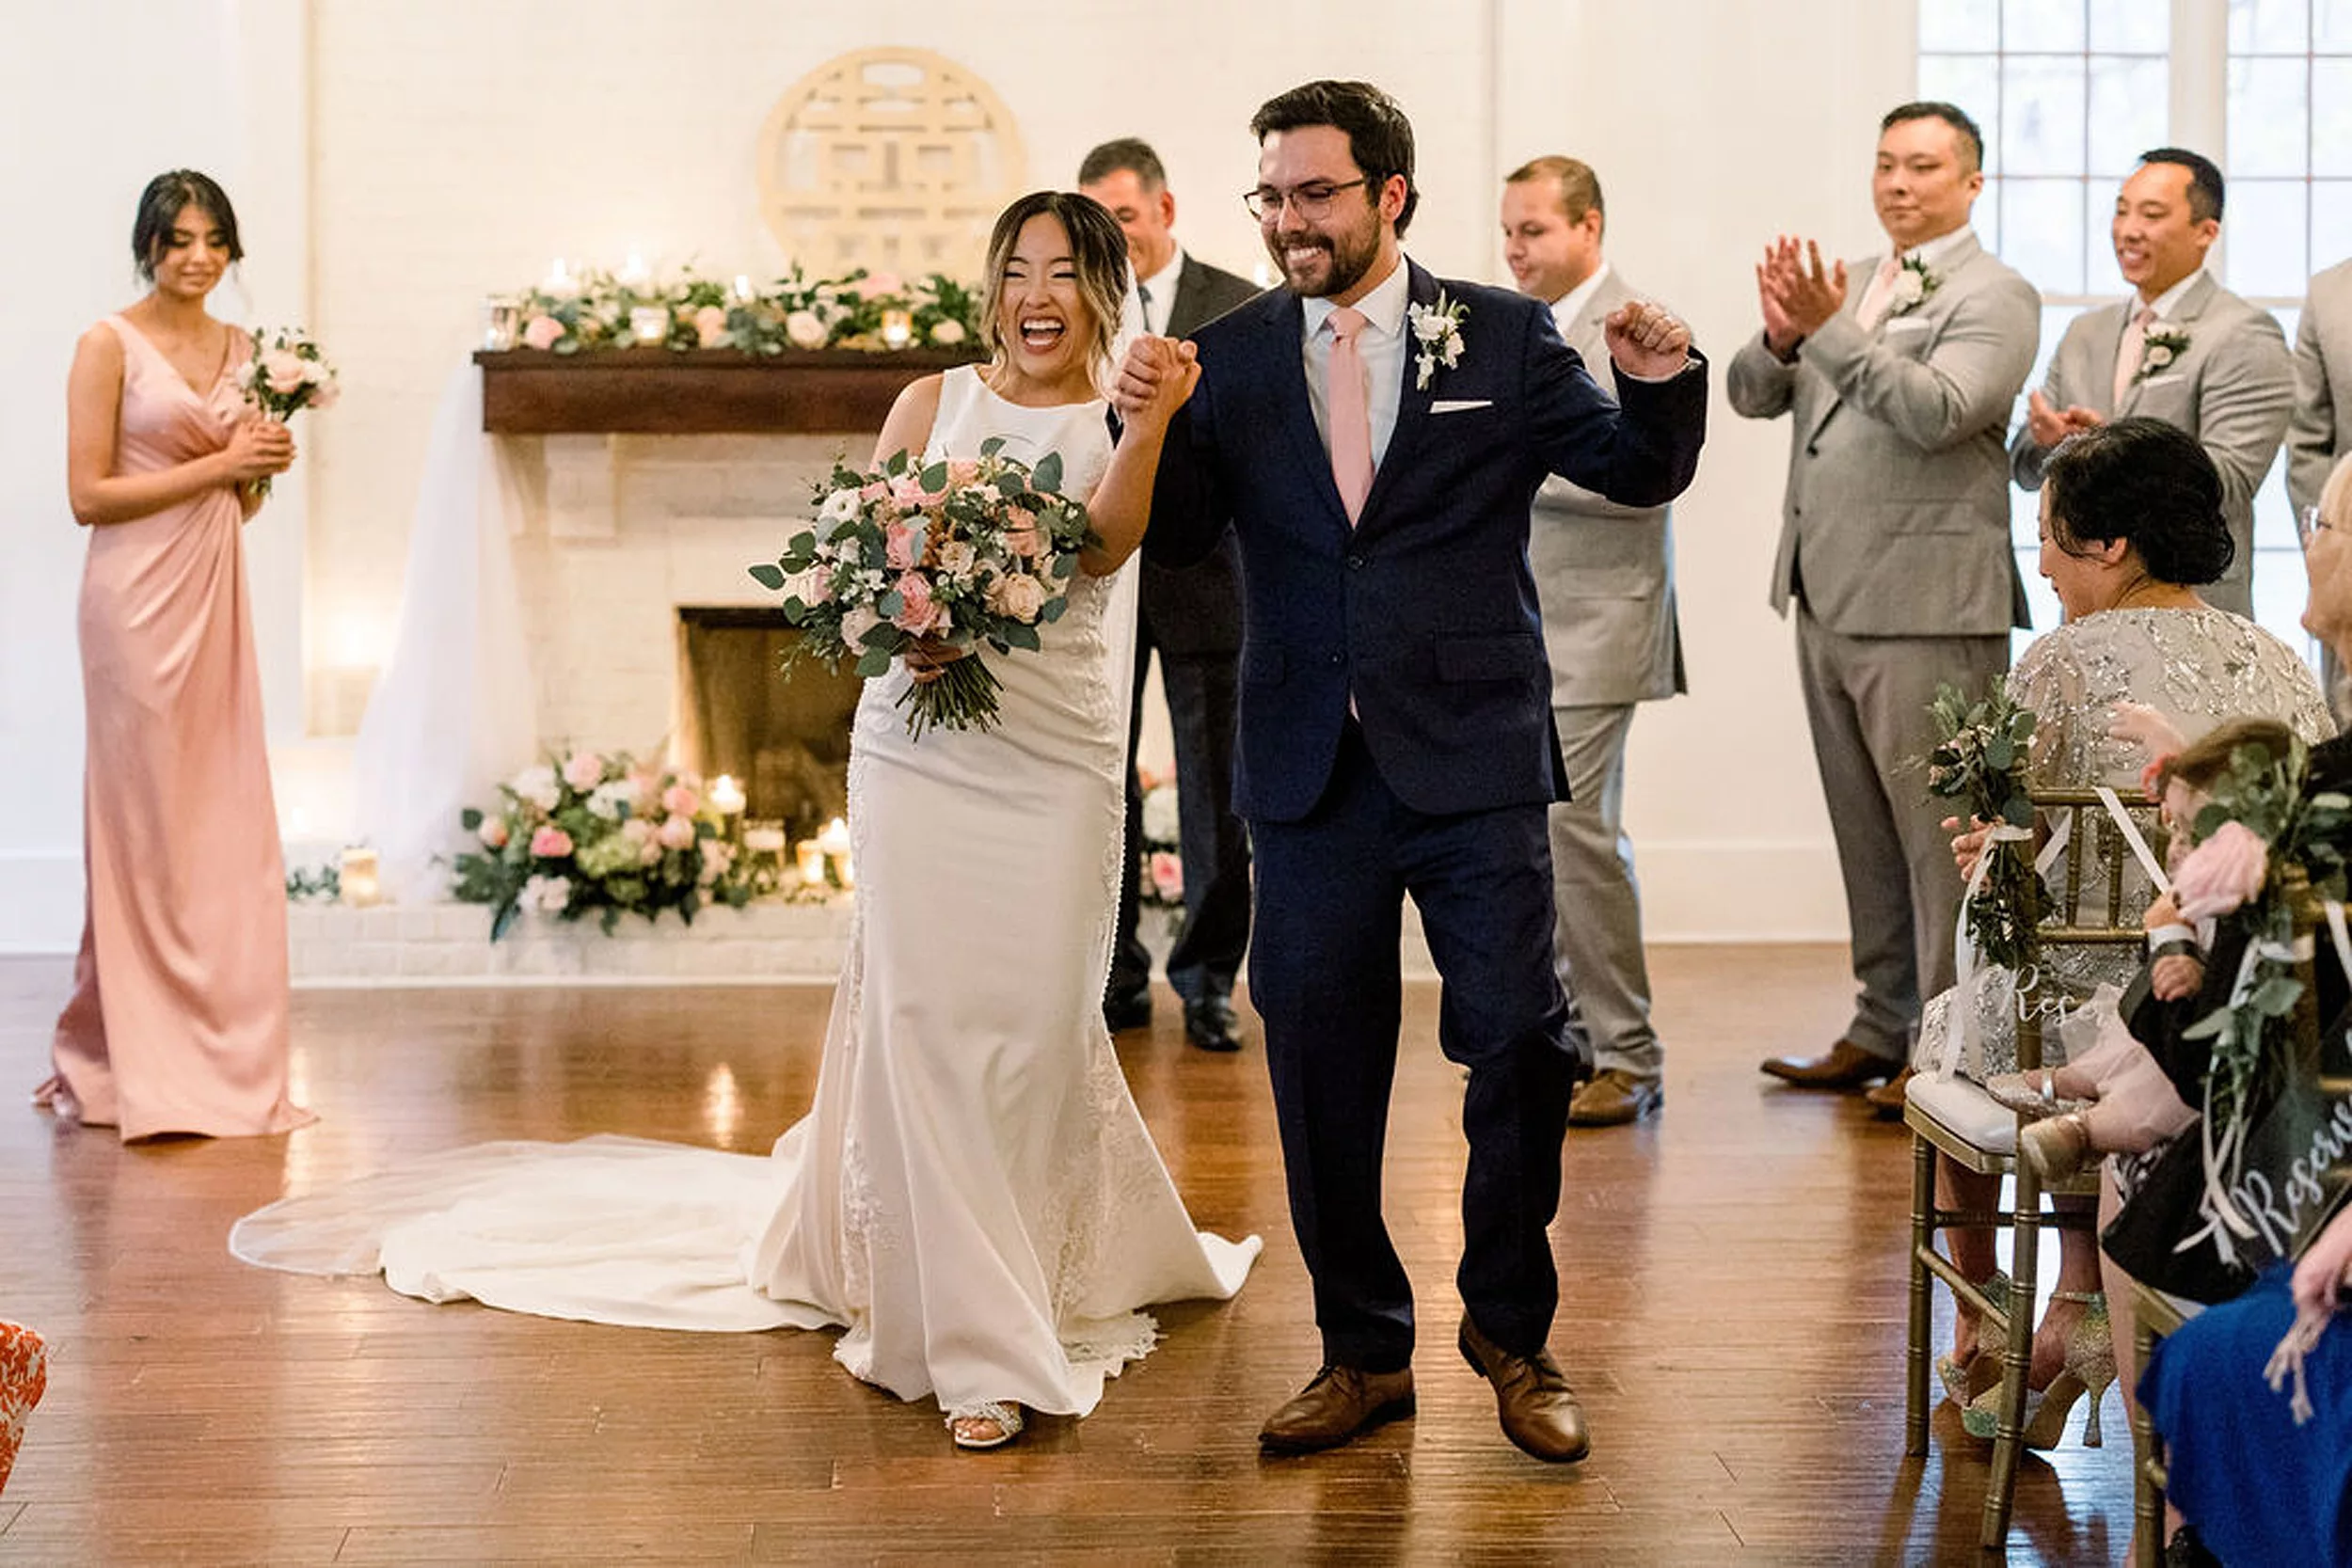 Newlyweds celebrate and raise their hands as they walk up the aisle of their payne-corley house wedding ceremony